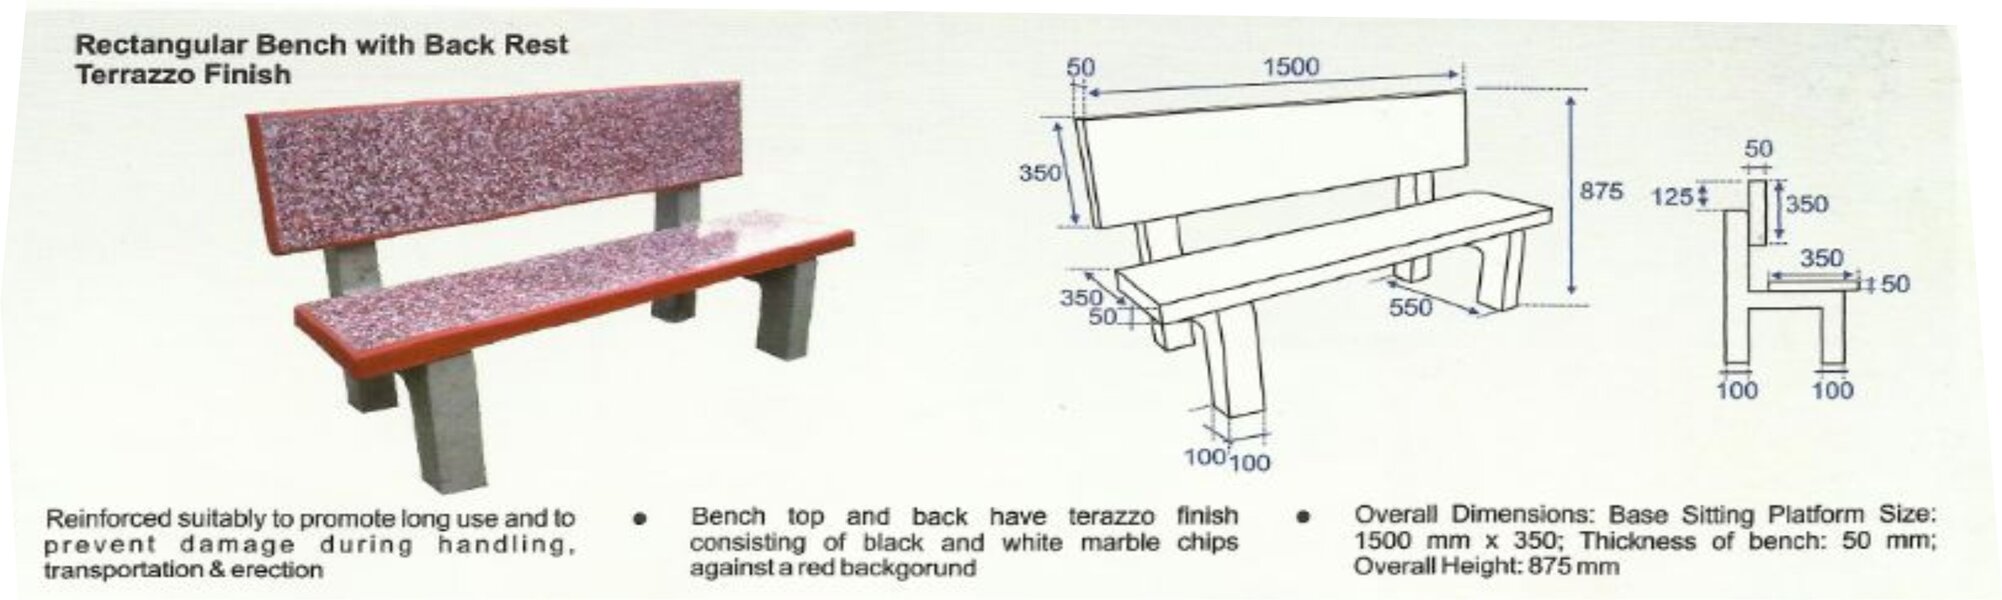 CHAIR BENCH WITH TERRAZZO FINISH WITH DETAILS .jpg